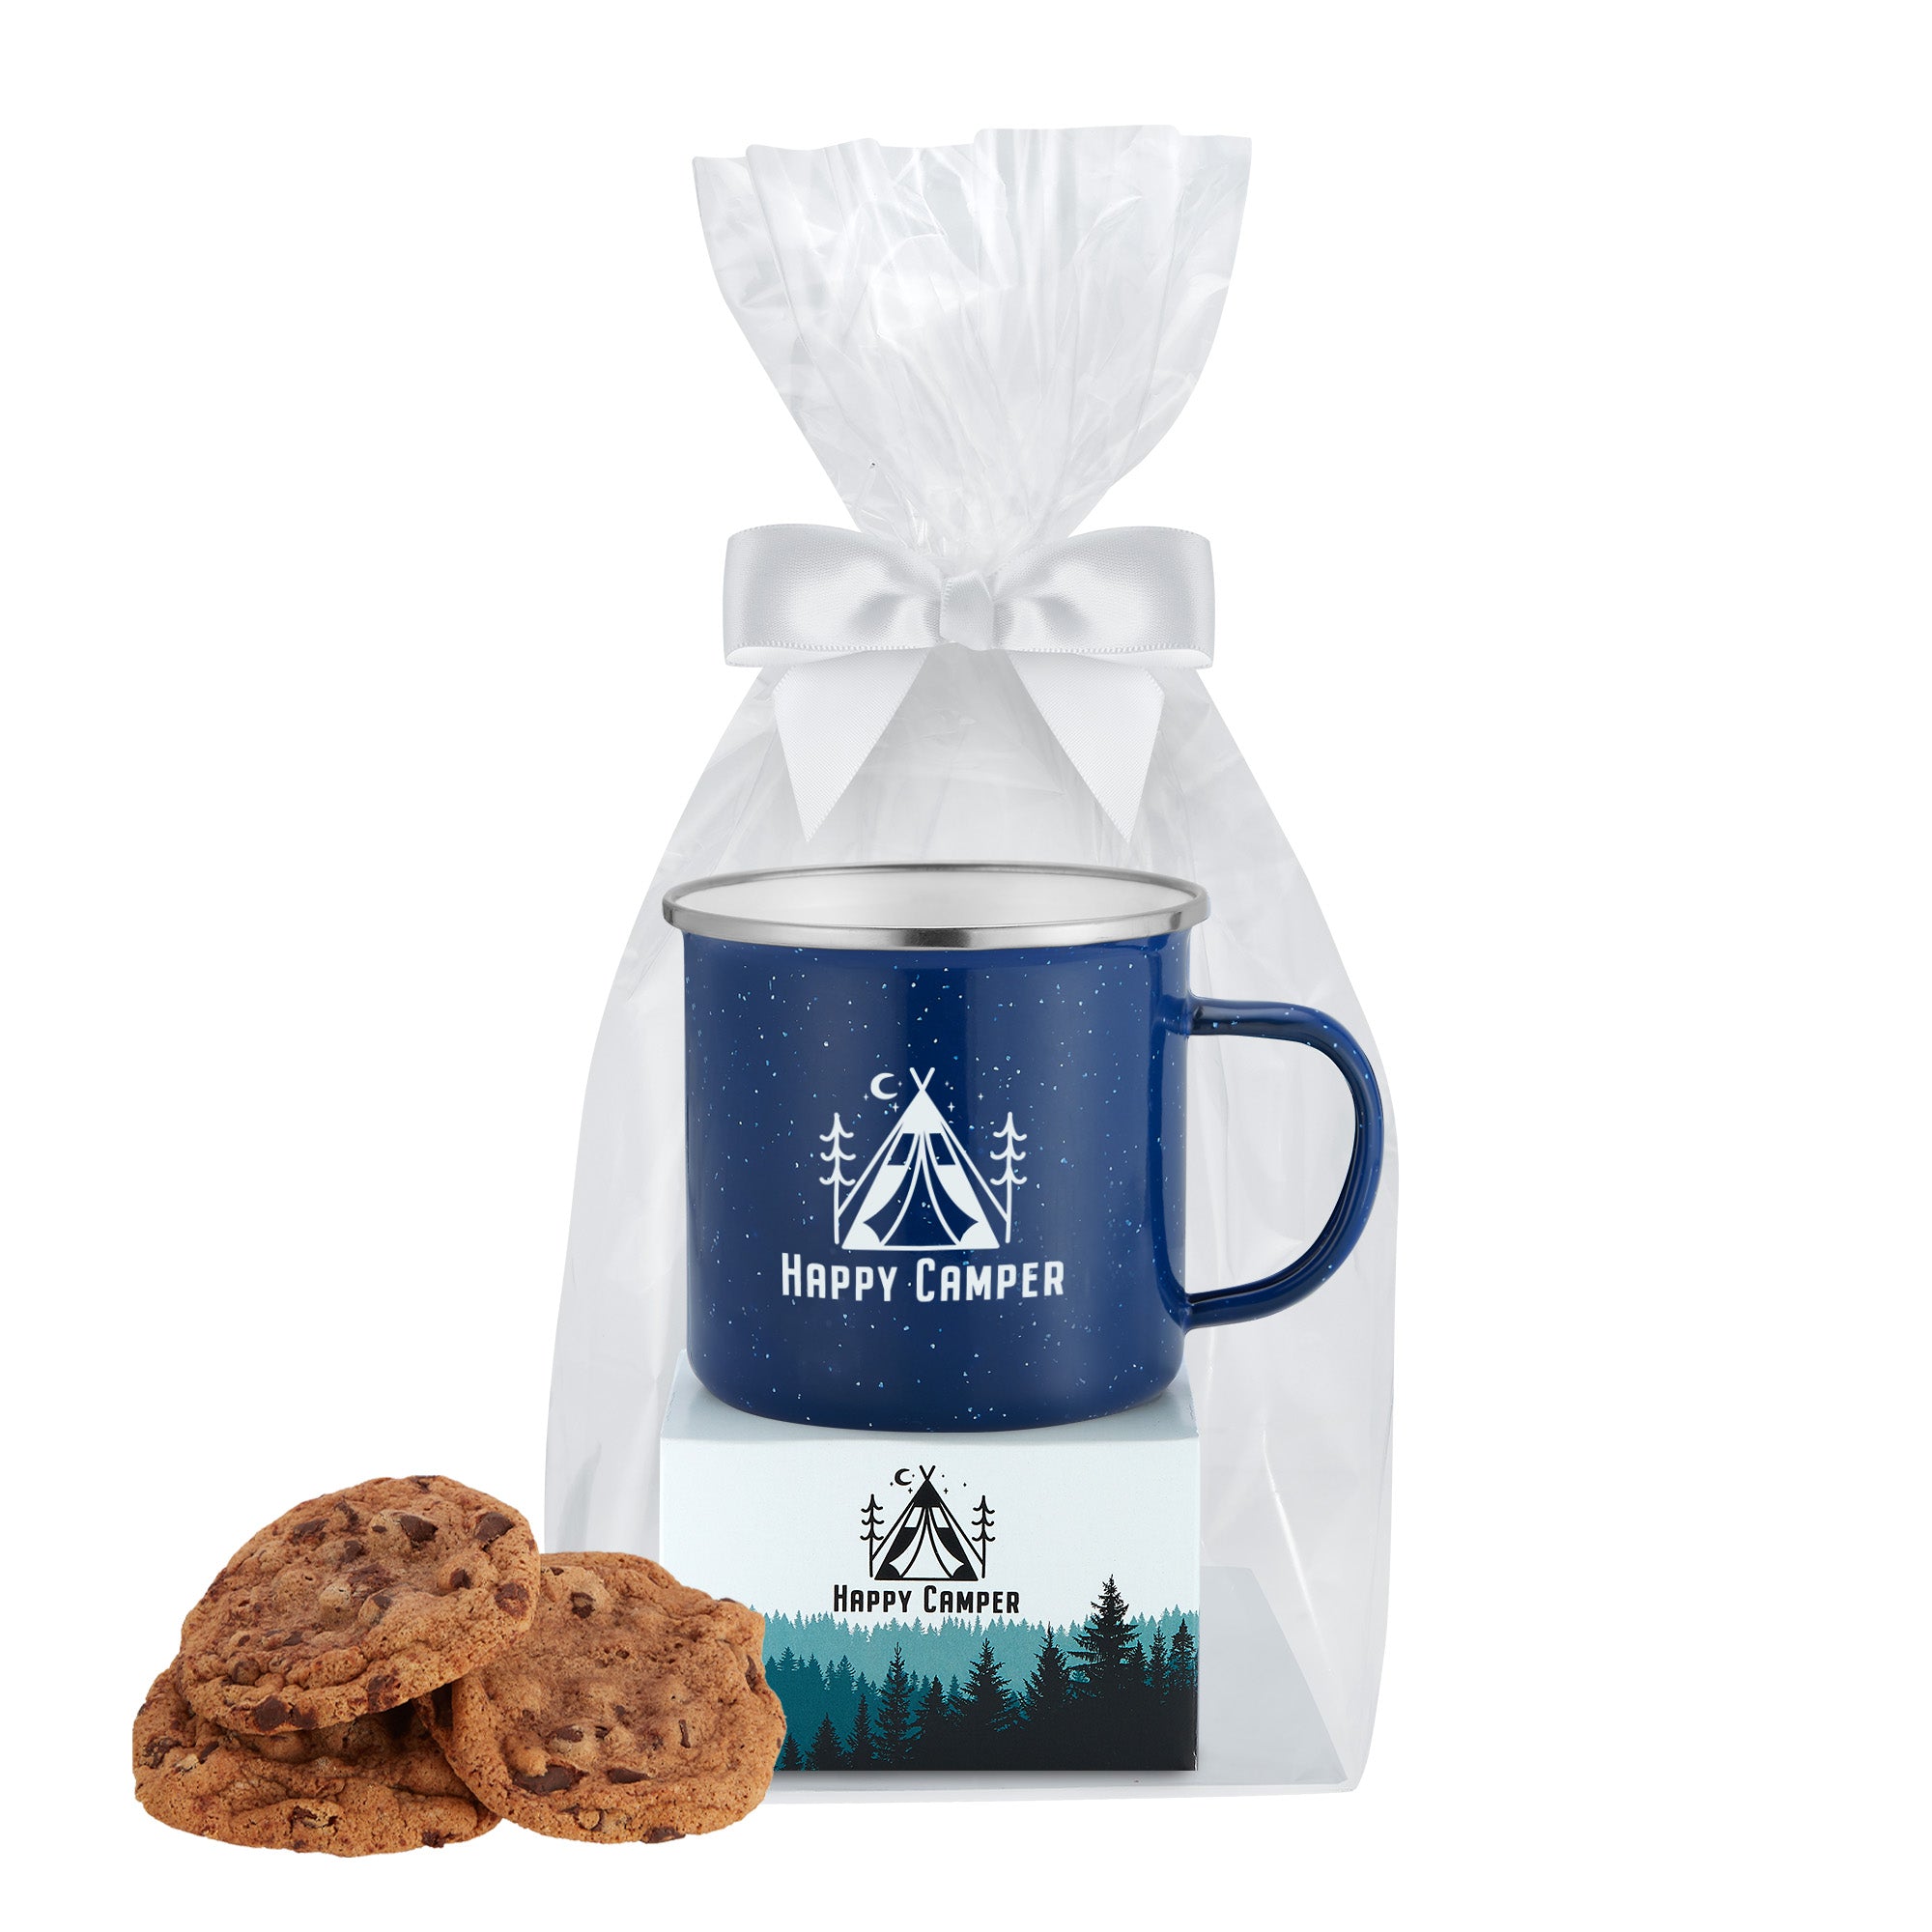 Starbucks® Pike Place Ground Coffee & Speckled Camping Mug Gift Set